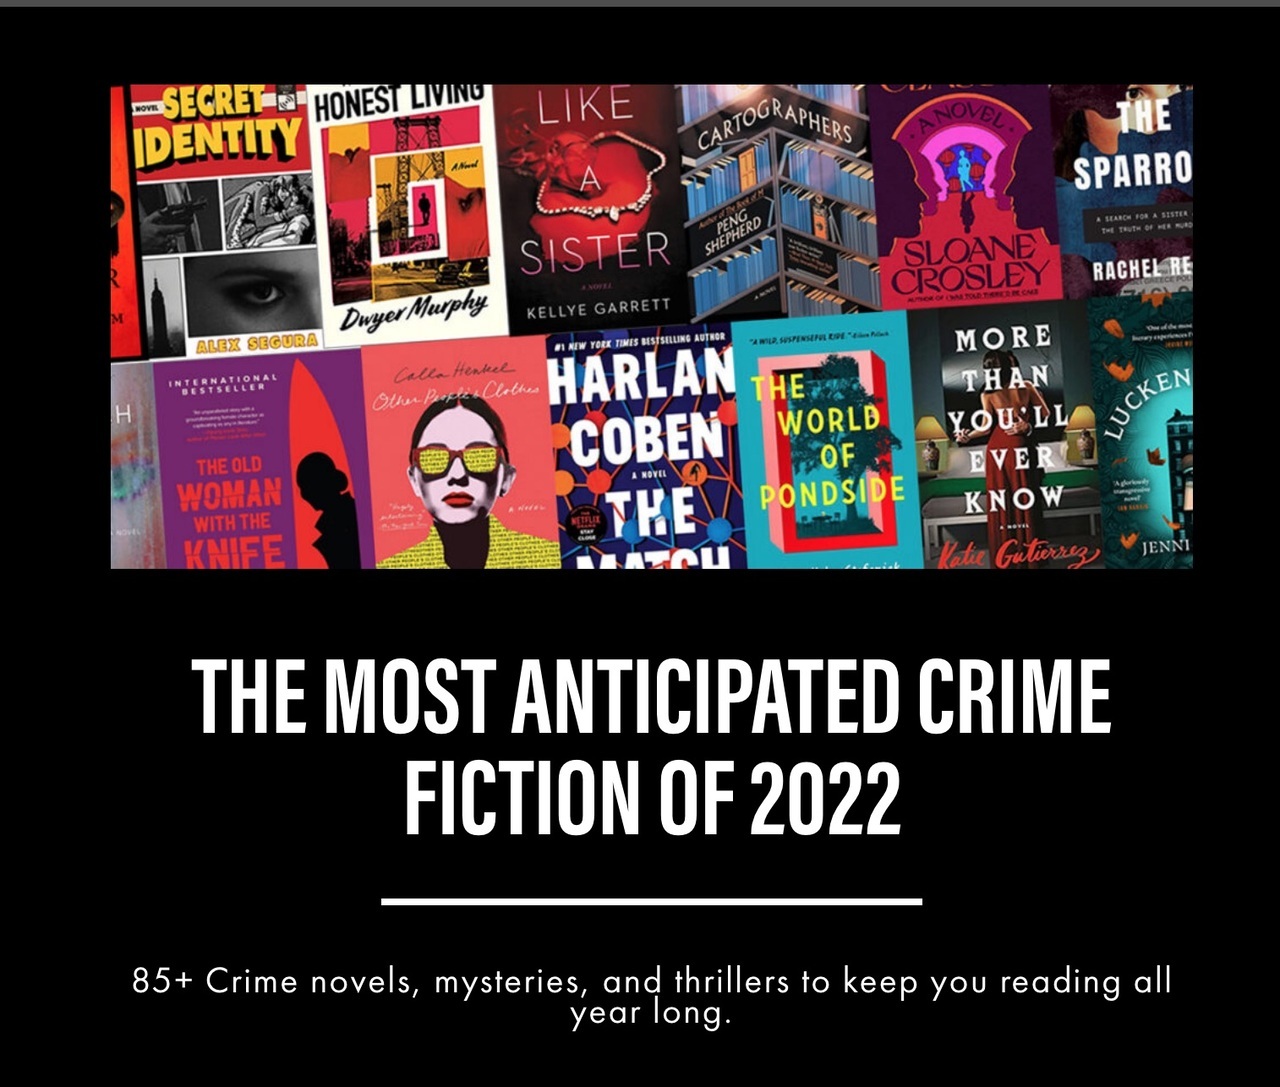 THE WORLD OF PONDSIDE, a new novel by Mary Helen Stefaniak, coming from Blackstone Publishing April 19, 2022, is on CrimeRead's list of  the most anticipated crime fiction of 2022. 